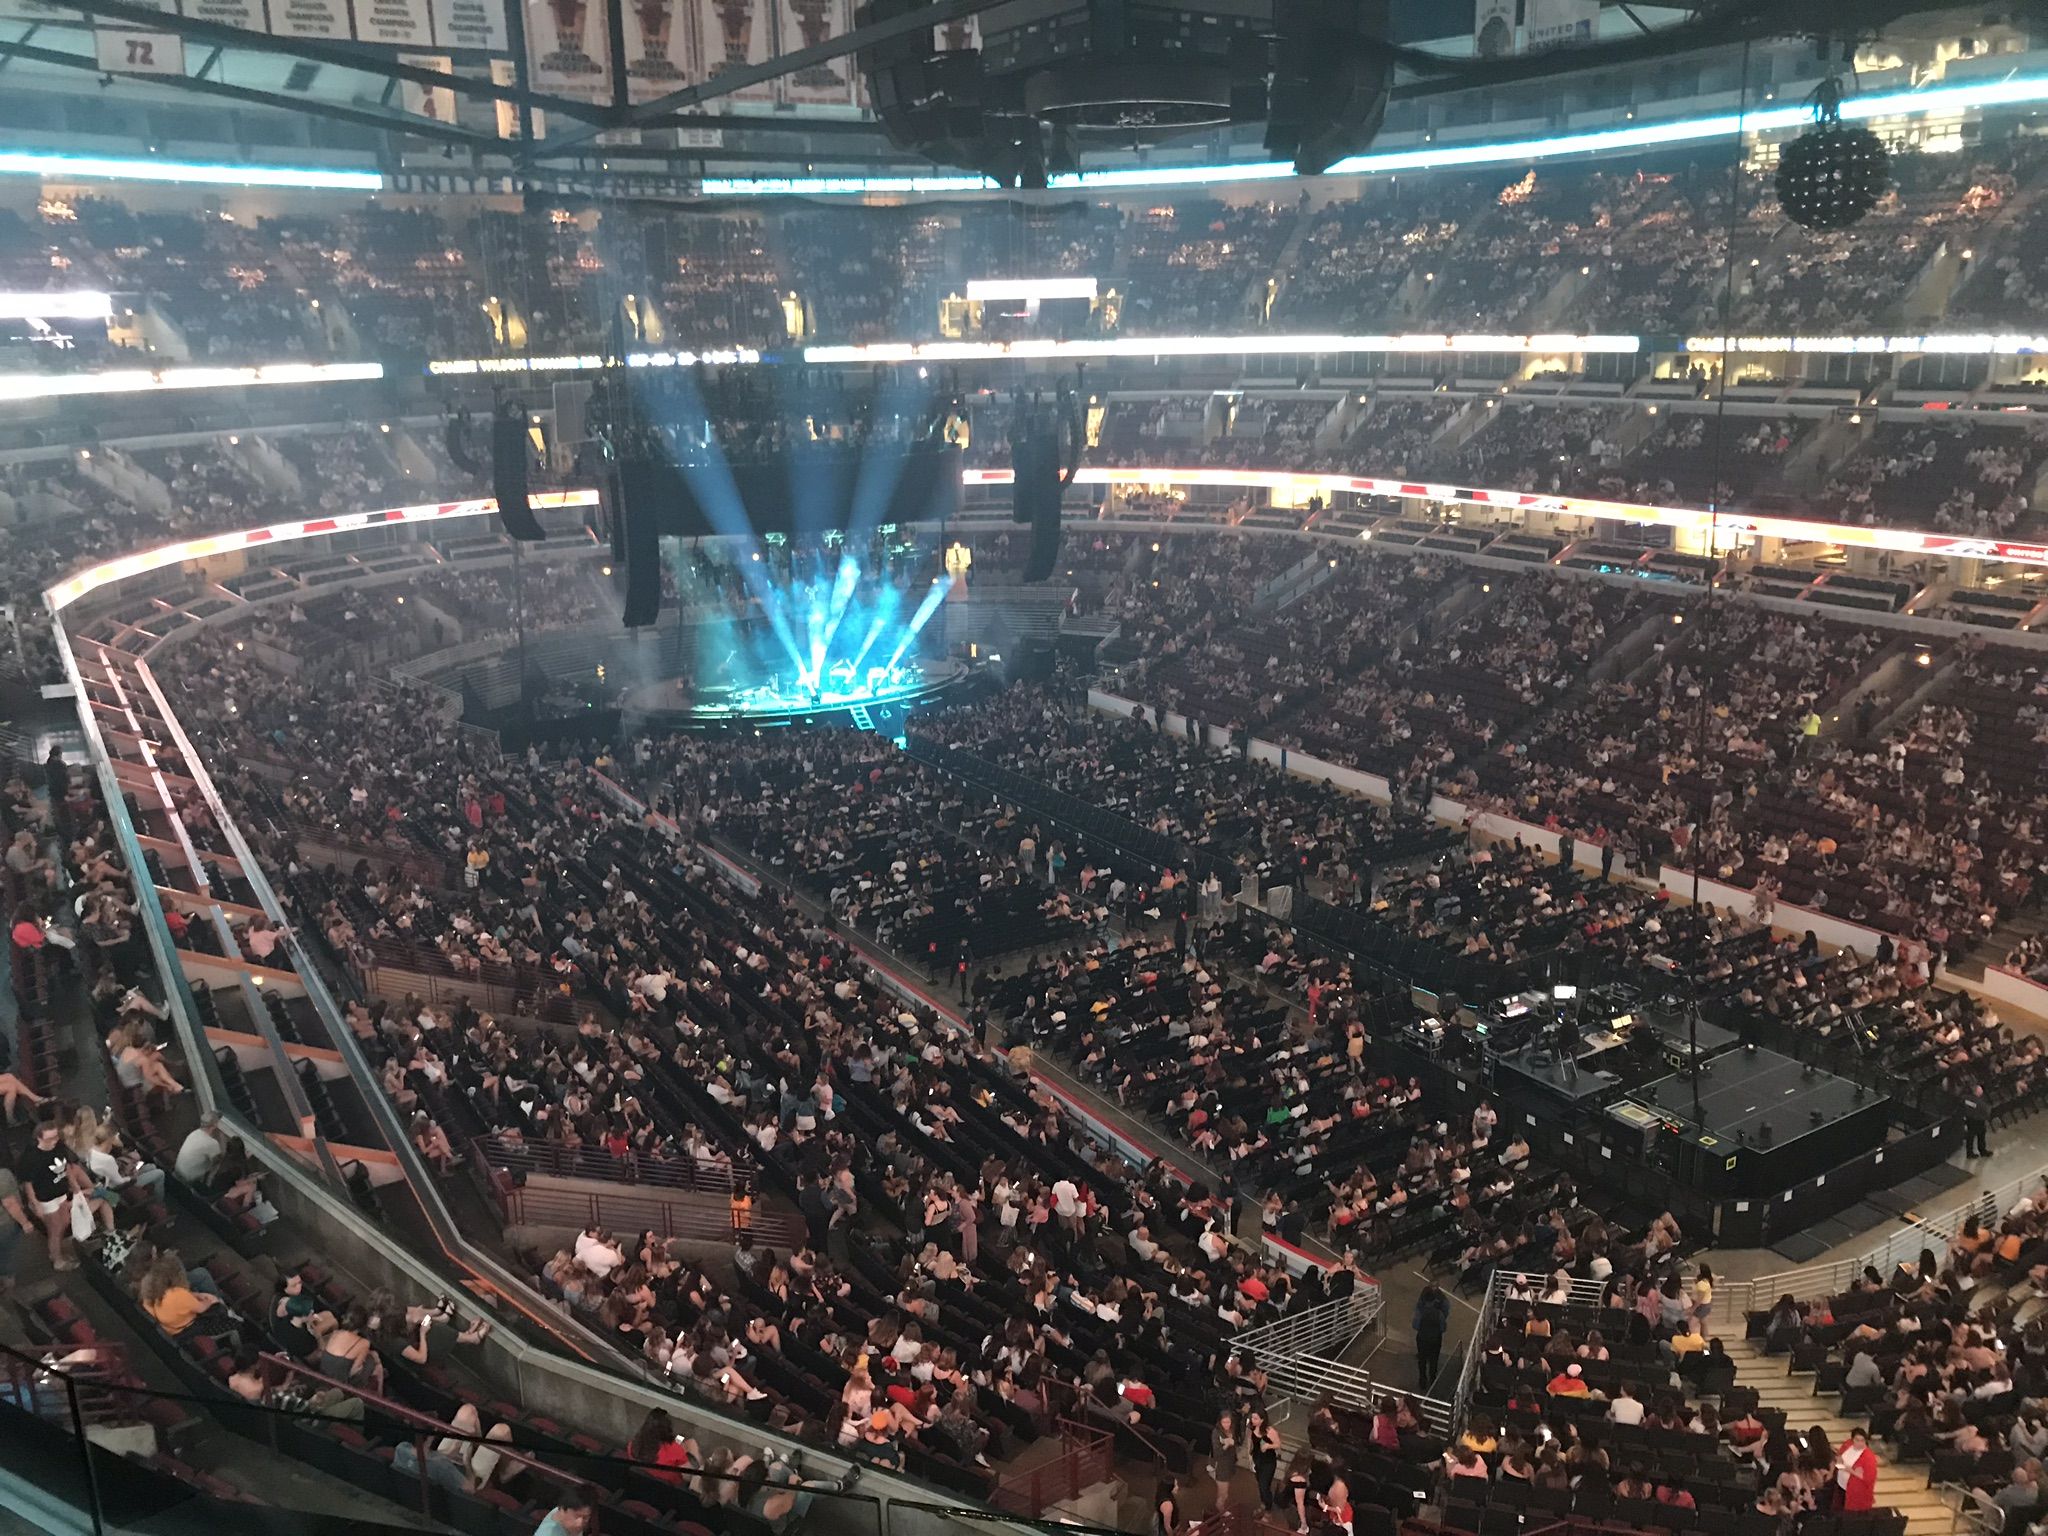 United Center Section 313 Concert Seating - RateYourSeats.com